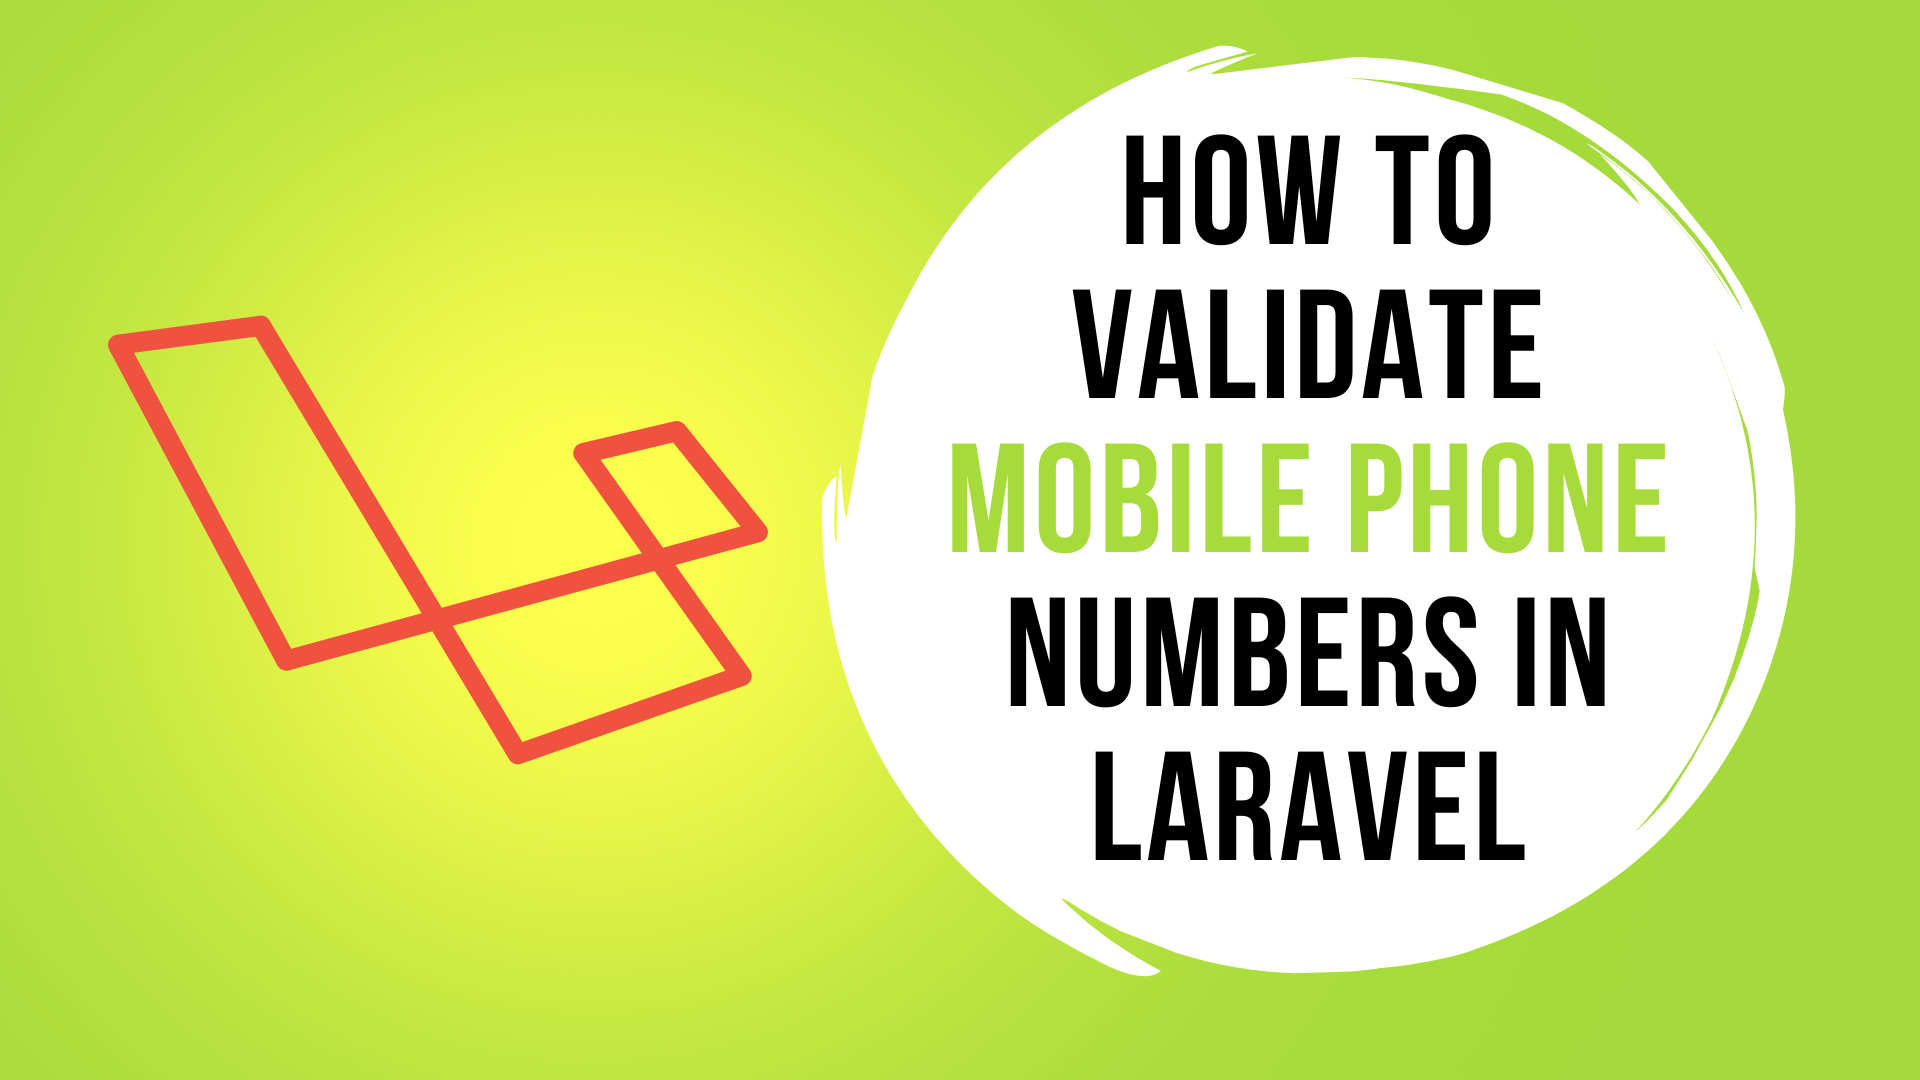 How to validate mobile phone numbers in Laravel